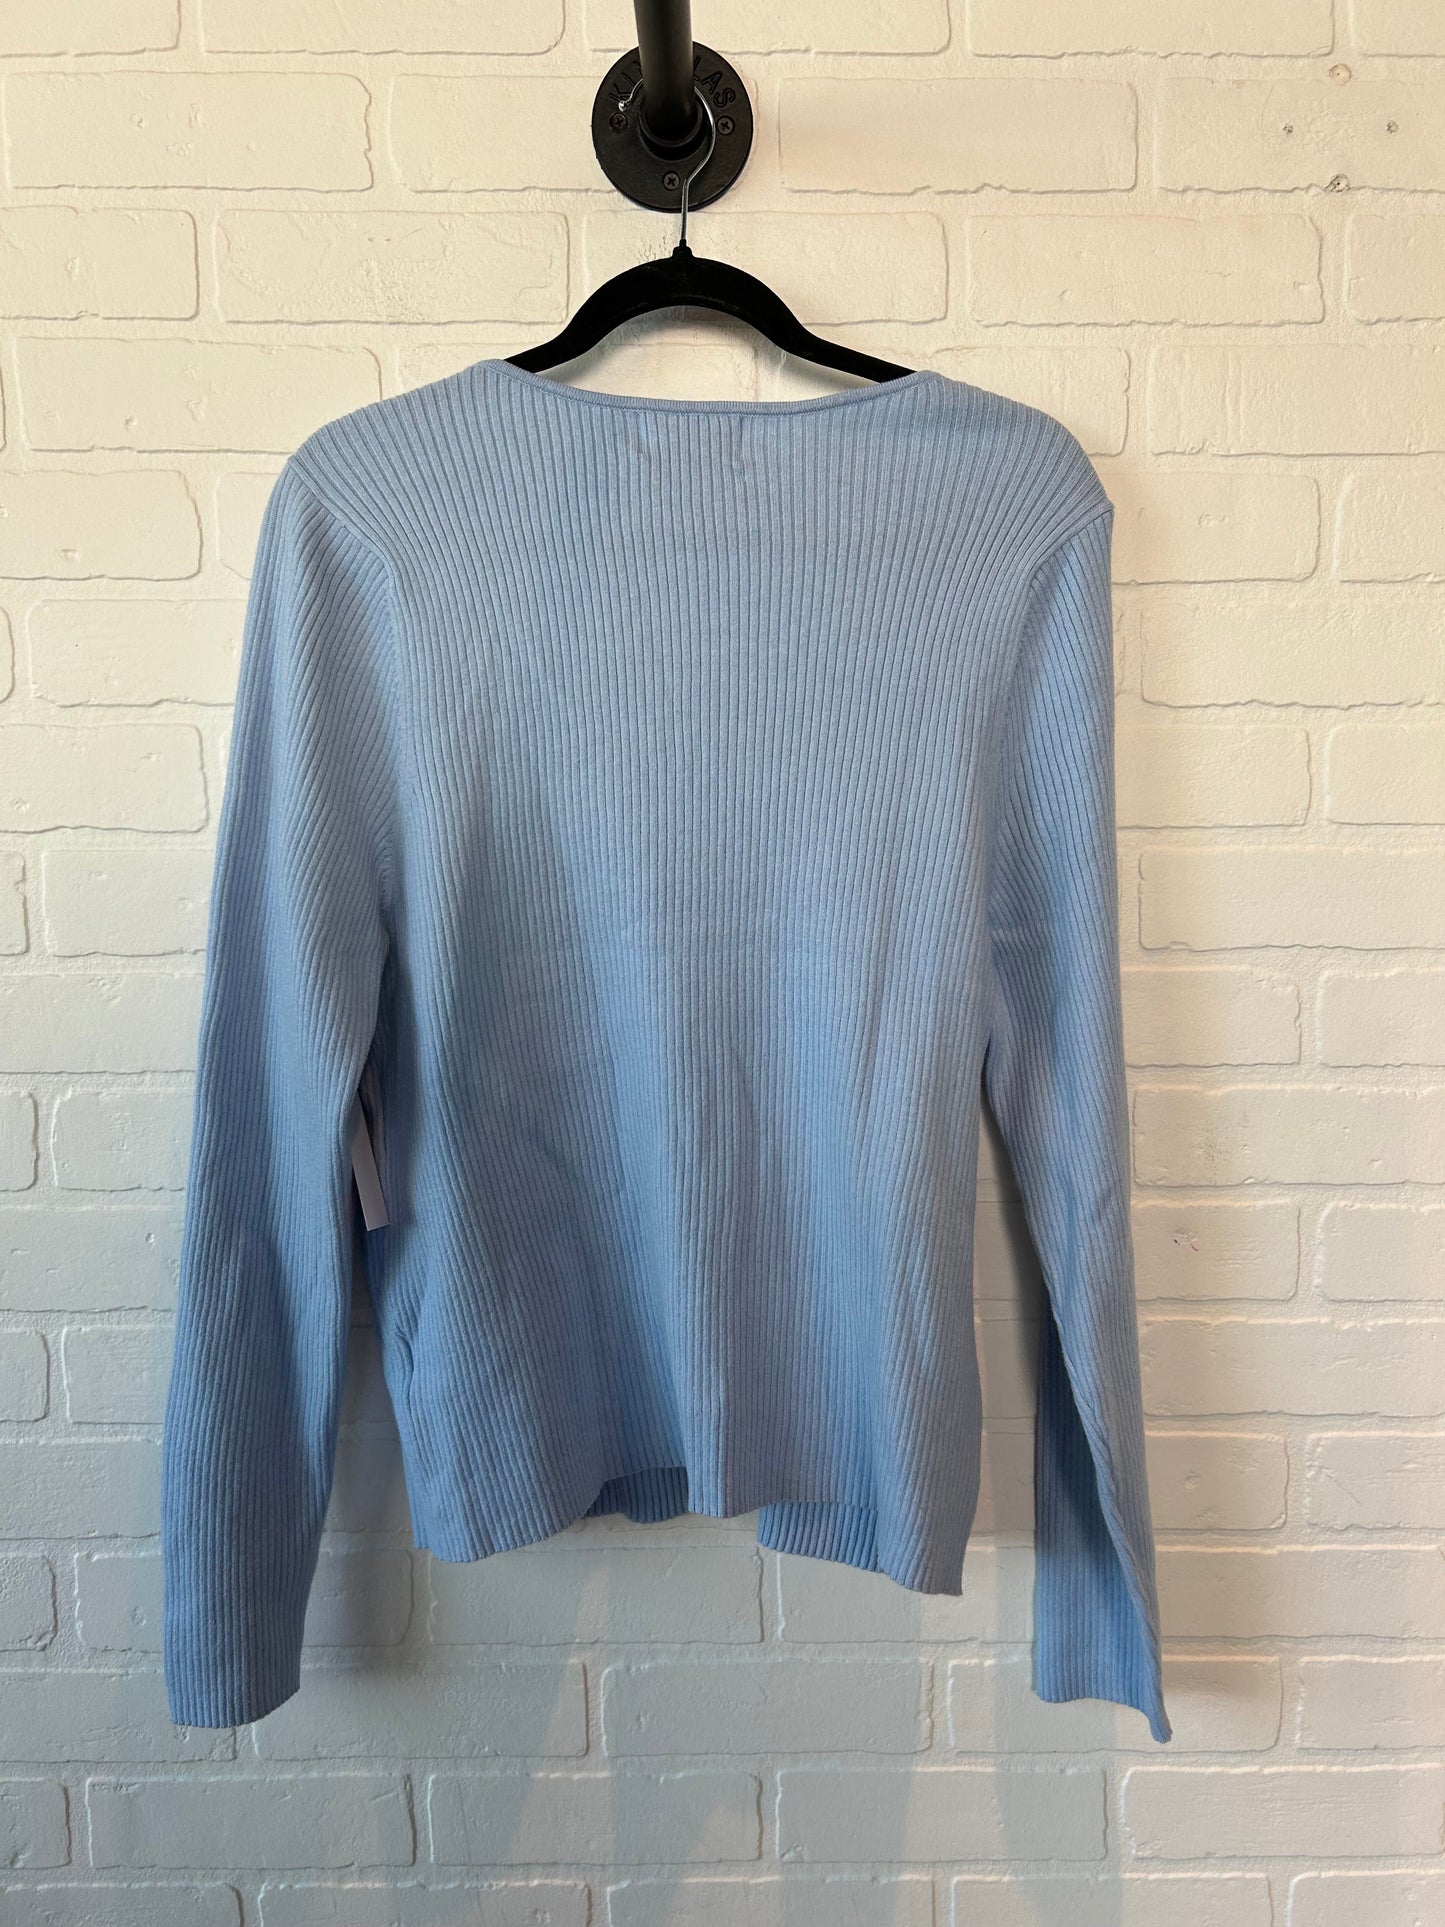 Blue Sweater Old Navy, Size 1x